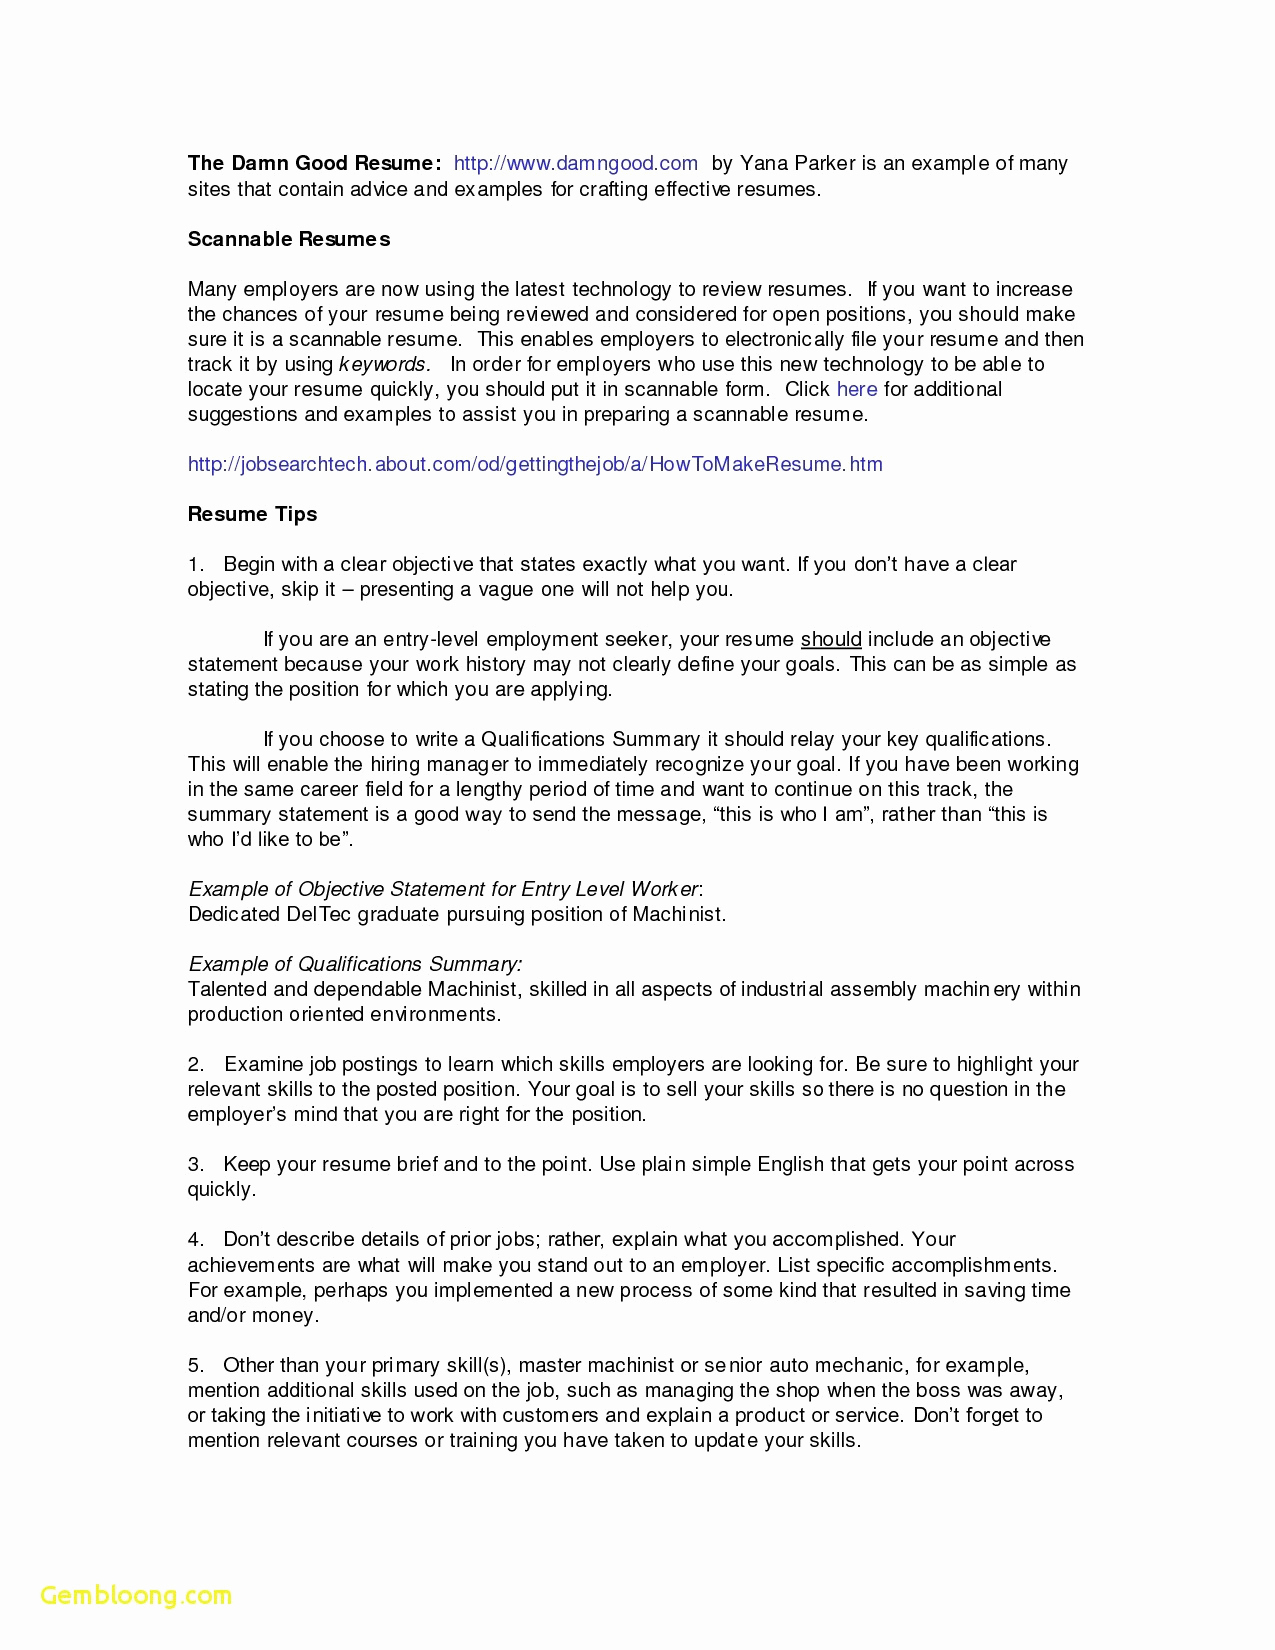 Resume Objective Example Resume Summary Samples Account Manager Beautiful Photos Resume For Accounting Job Fresh Resume Objective Examples Account Of Resume Summary Samples Account Manager resume objective example|wikiresume.com